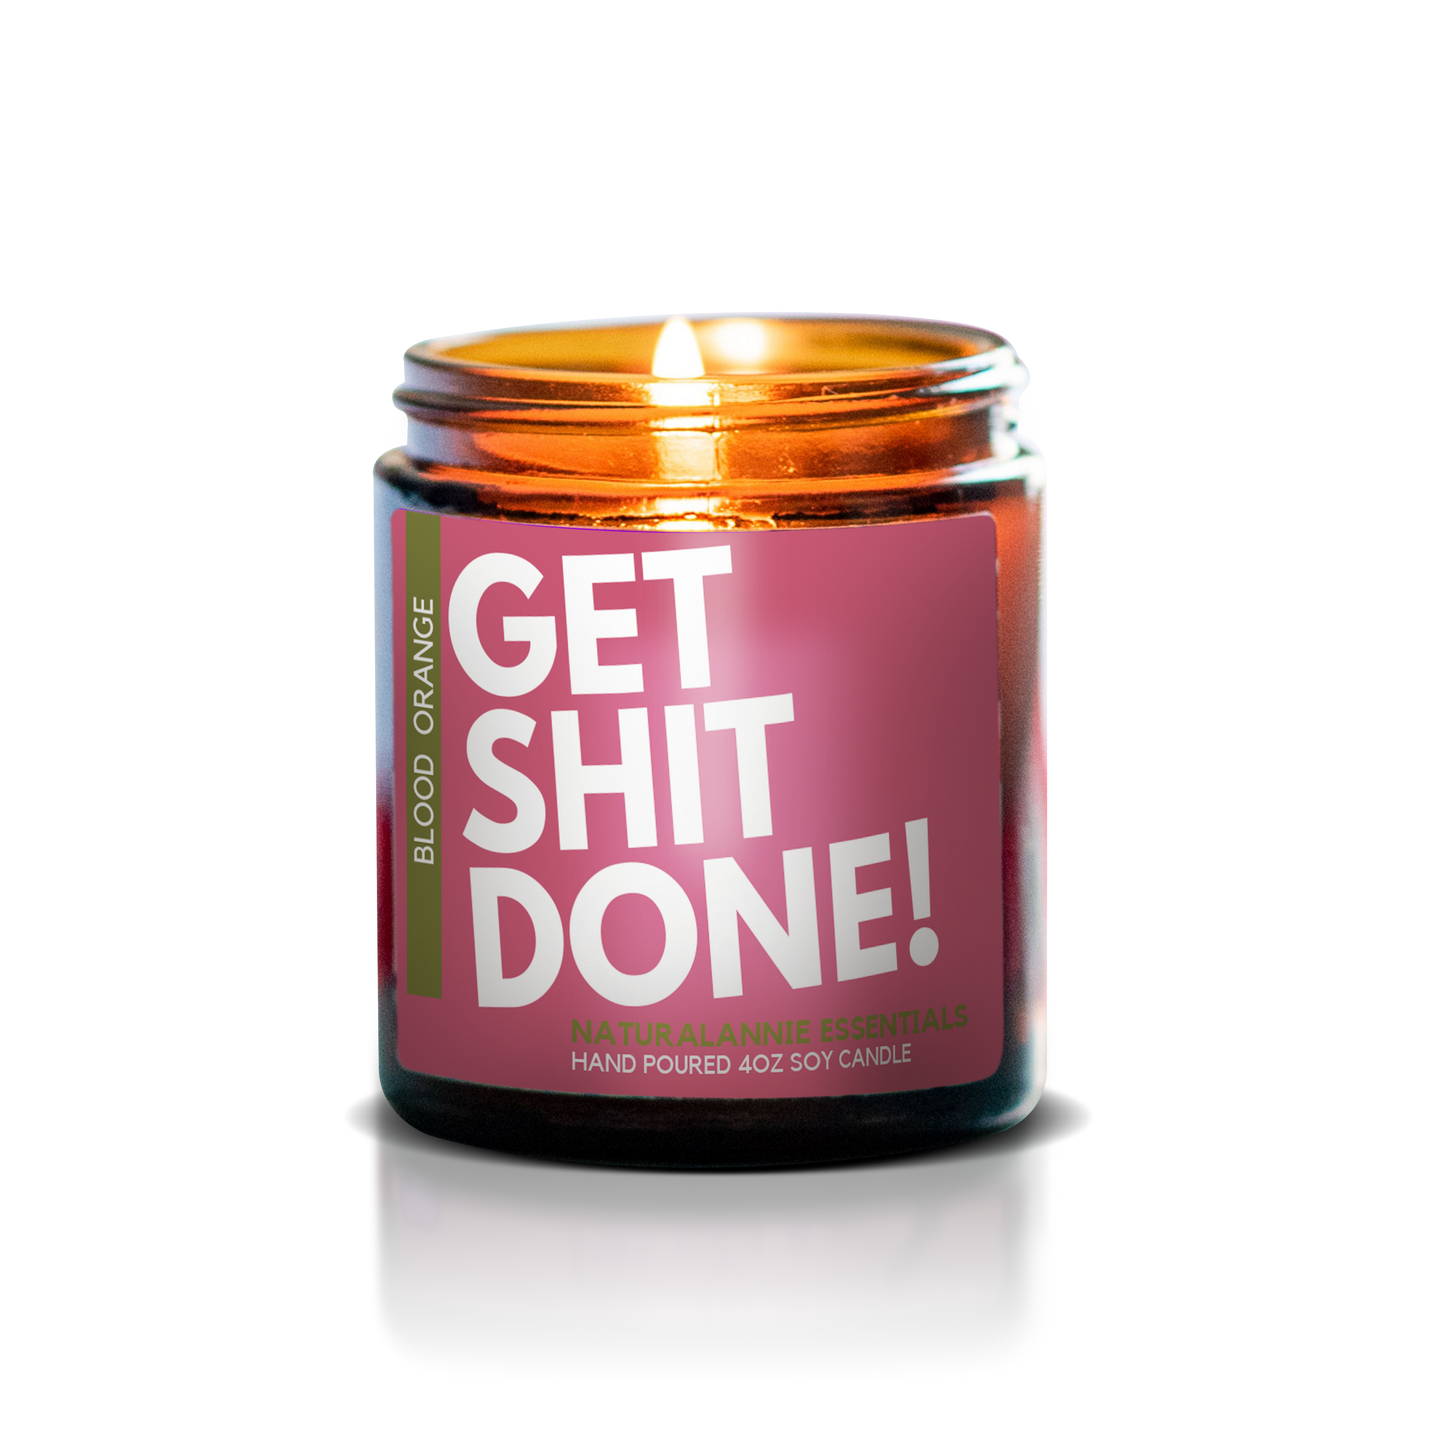 GSD Get Shit Done! Blood Orange Hand-poured 4oz soy candle by Natural Annie Essentials